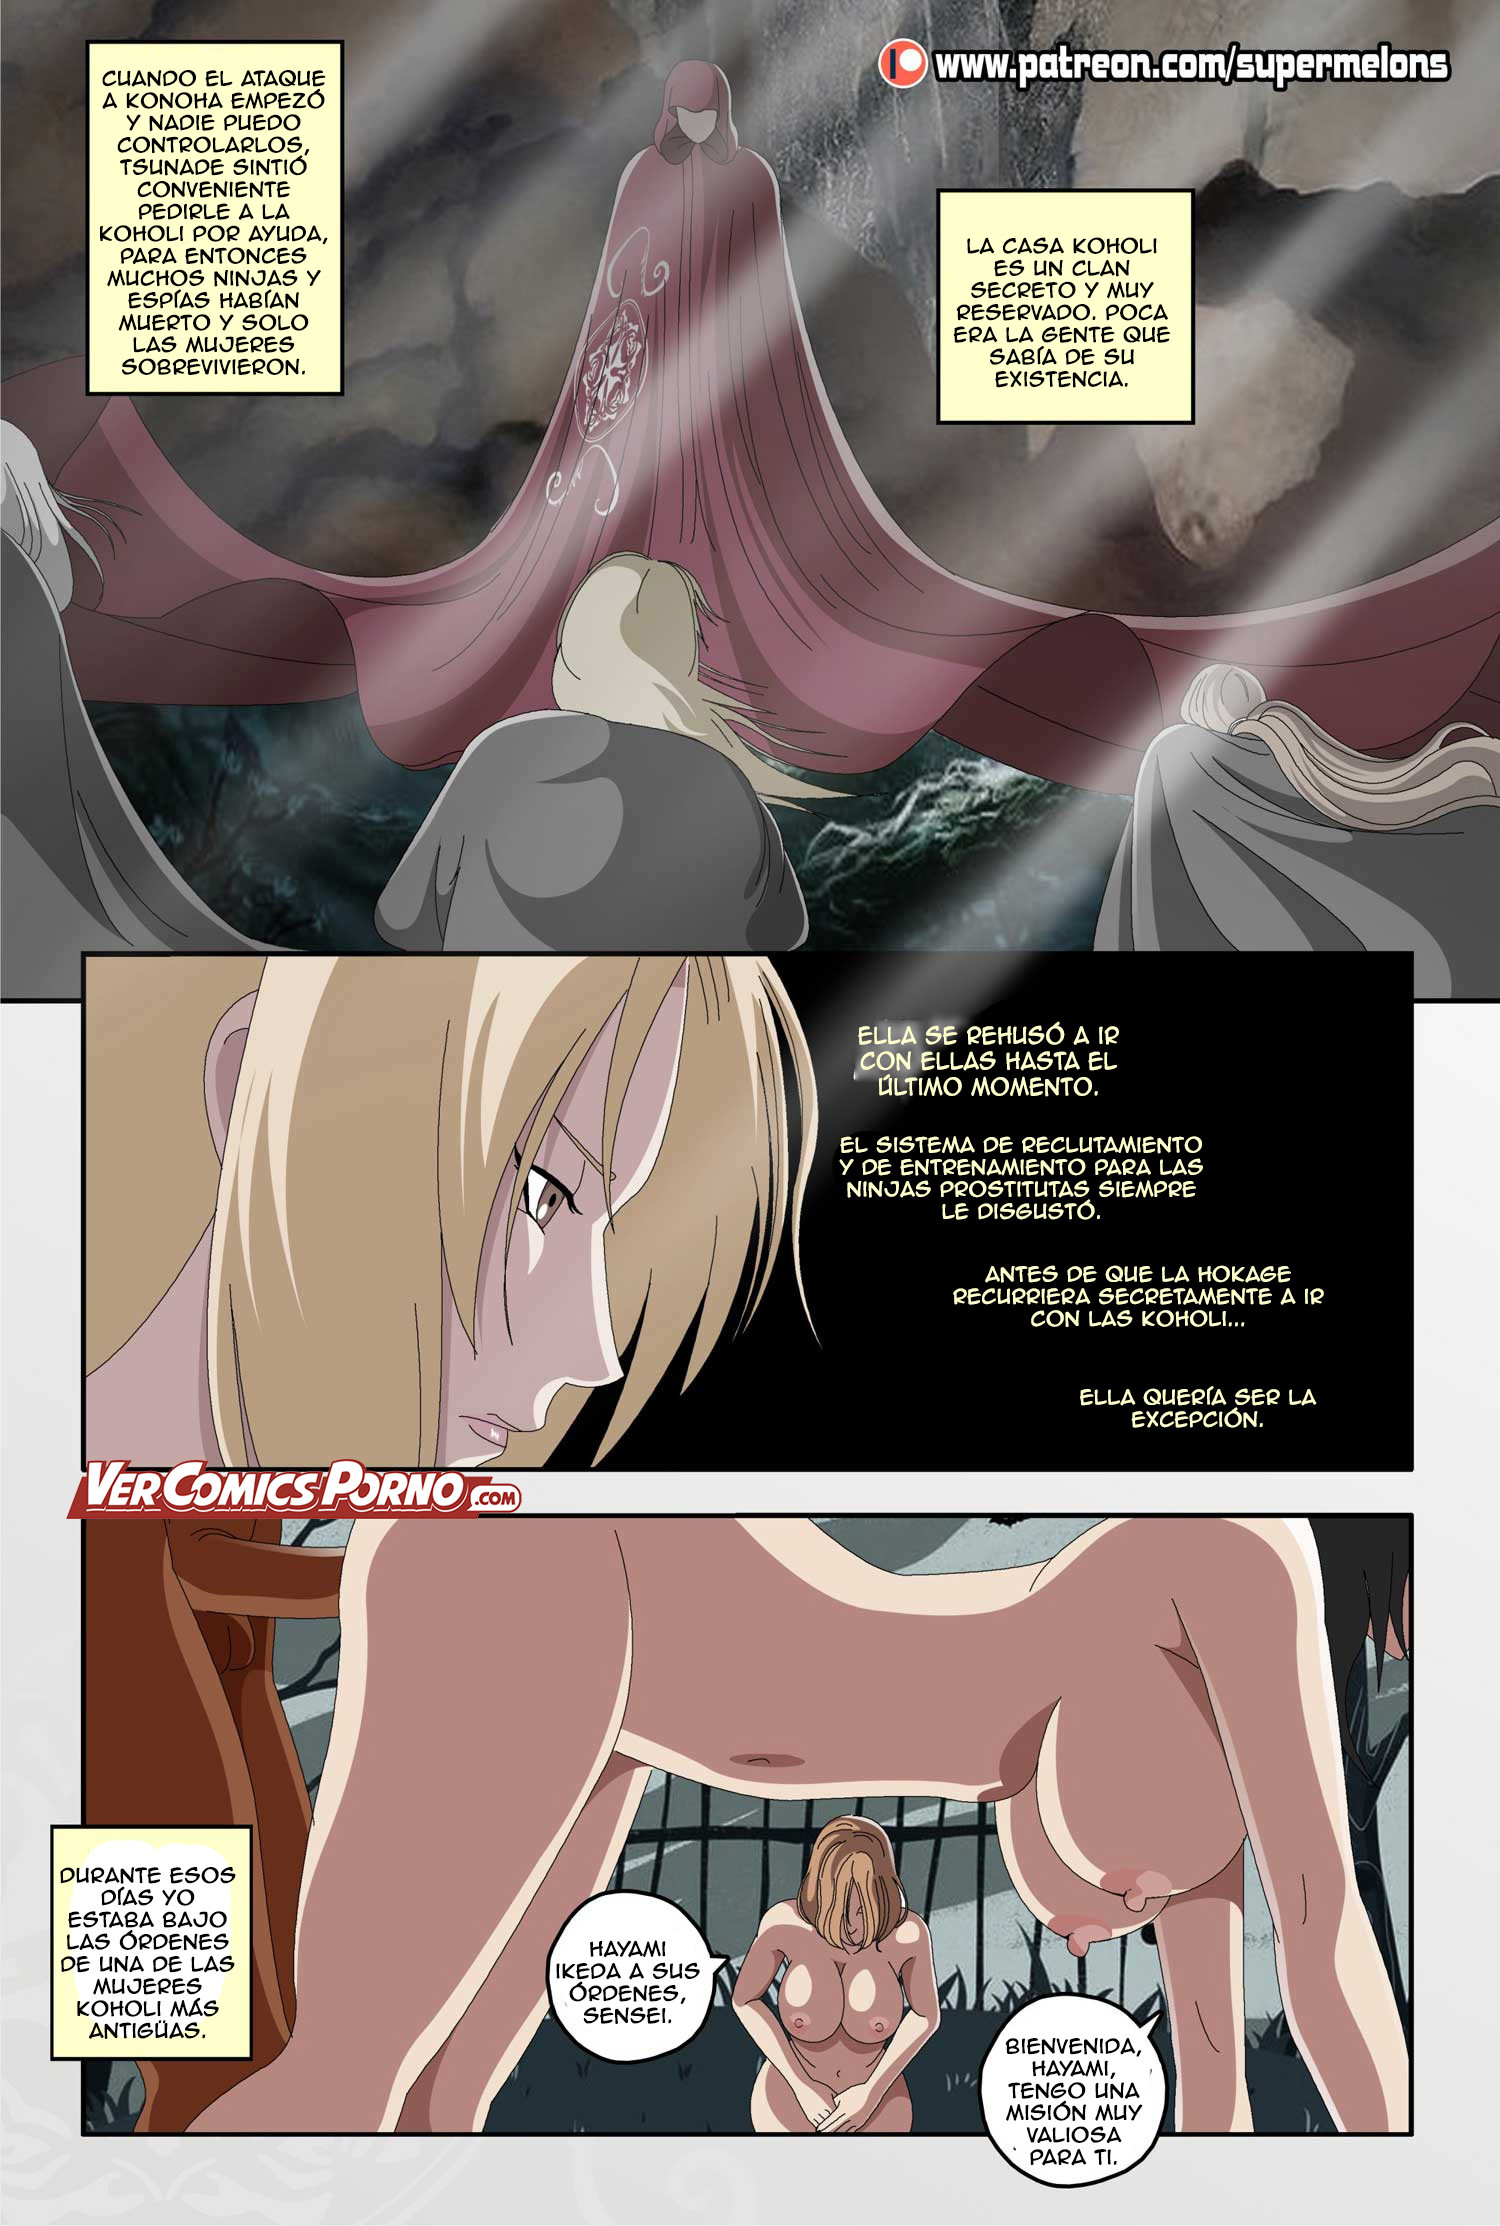 [Super Melons] The Woman with the Scarlet Seal (Traduccion Exclusiva) - 51